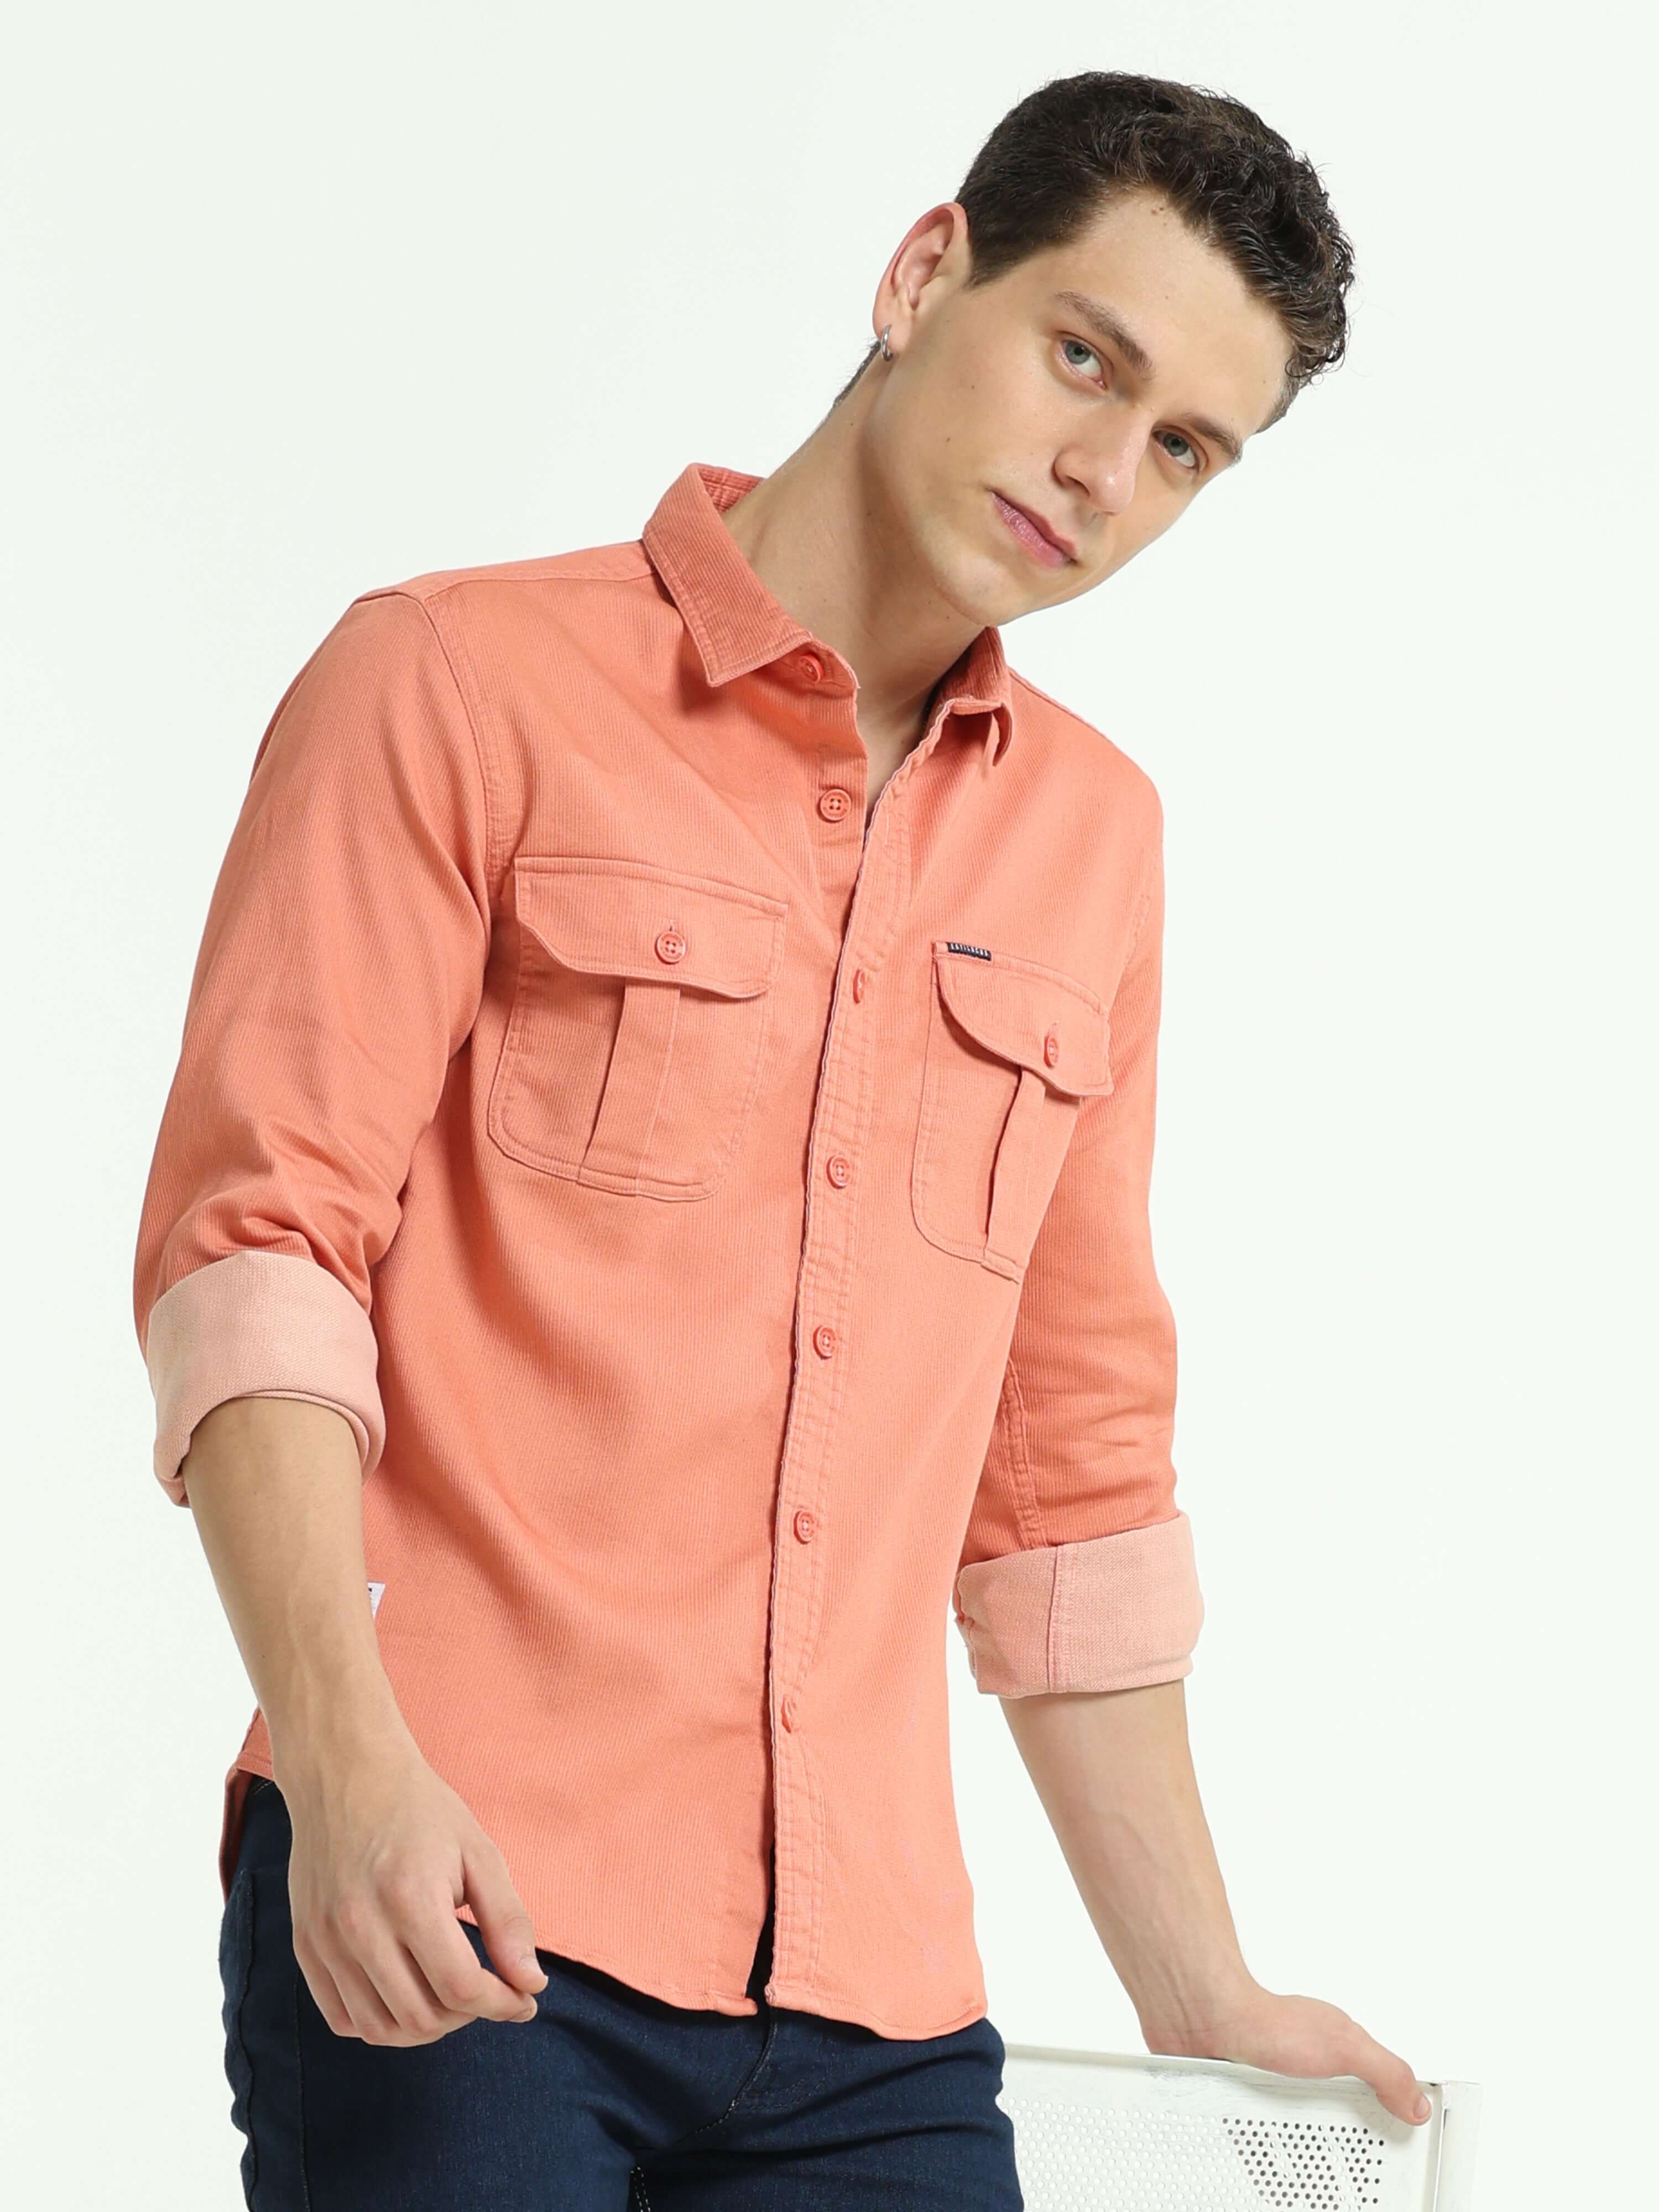 Salmon solid double pocket shirt shop online at Estilocus. 100% Cotton • Full-sleeve solid shirt• Cut and sew placket• Regular collar• Double button edge cuff • Double pocket with flap • Curved bottom hemline . • All double needle construction, finest qua